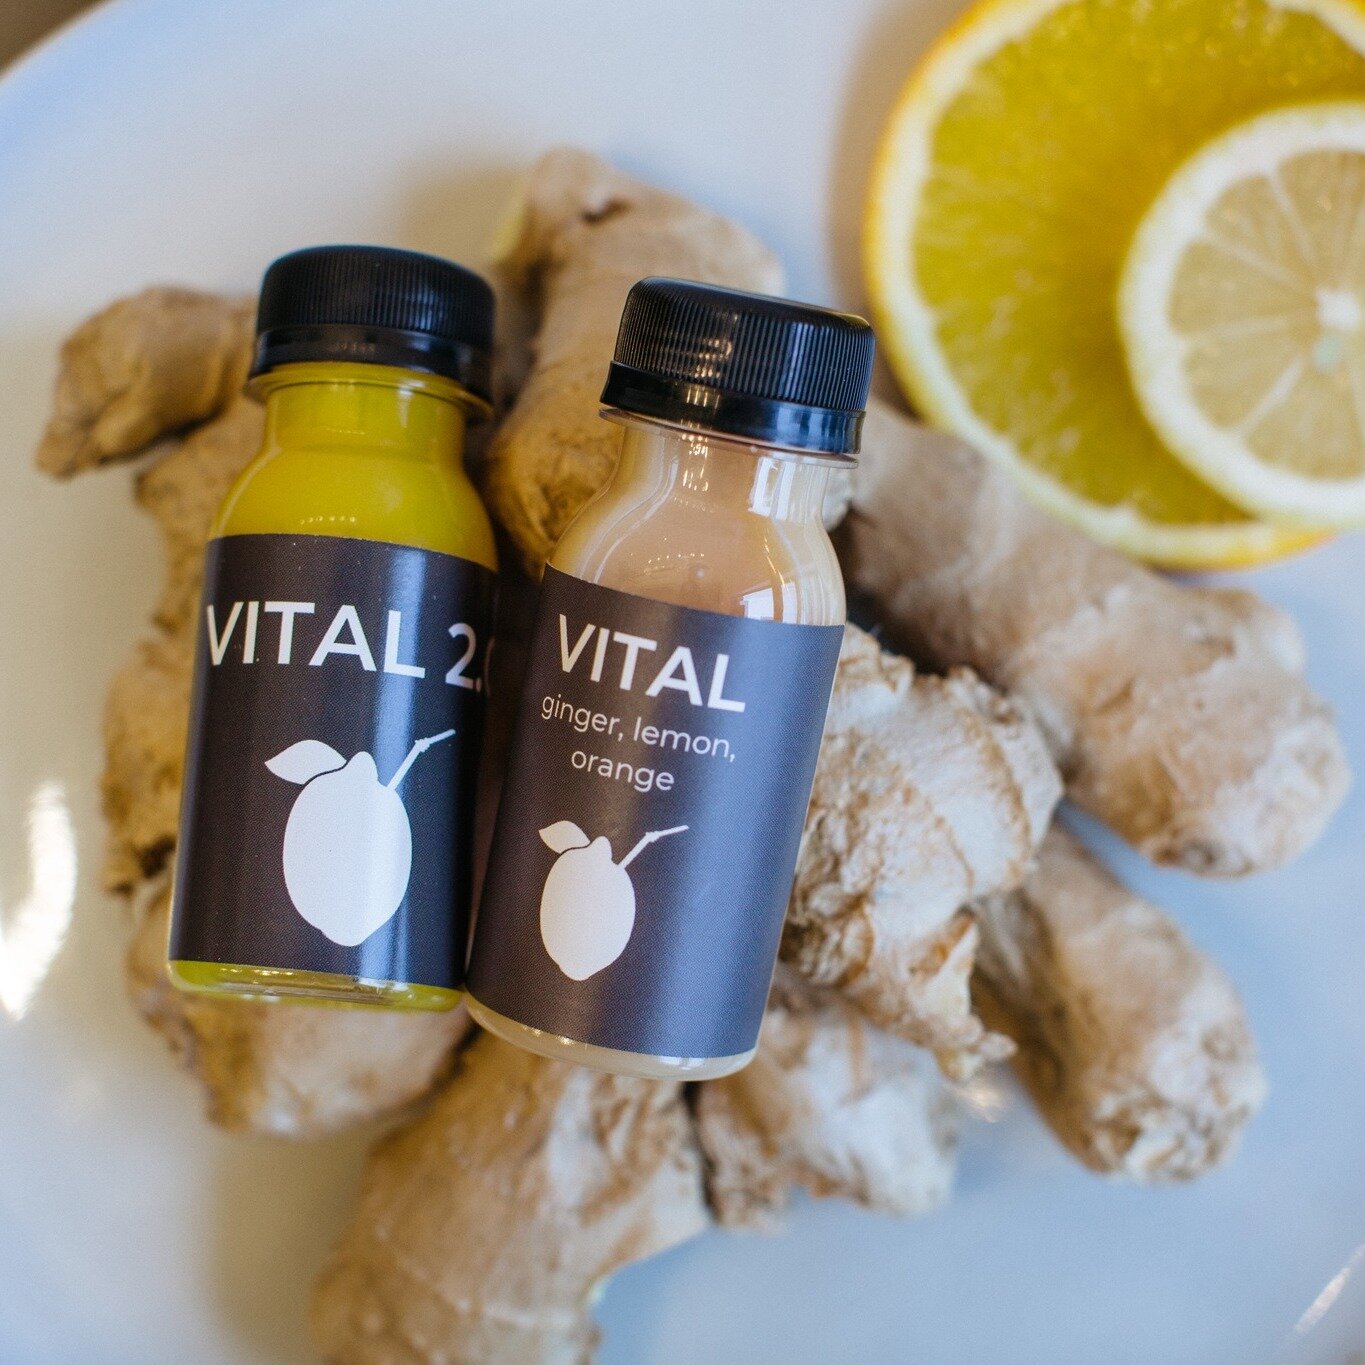 Take a break from throwing out great savings? Not a chance, we're on a wellness roll! 🍋 

TODAY ONLY, conquer your vitality game and Buy 3 wellness shots to score 2 FREE! Stock up, boost that immune system, and let the wellness flow into the week ah